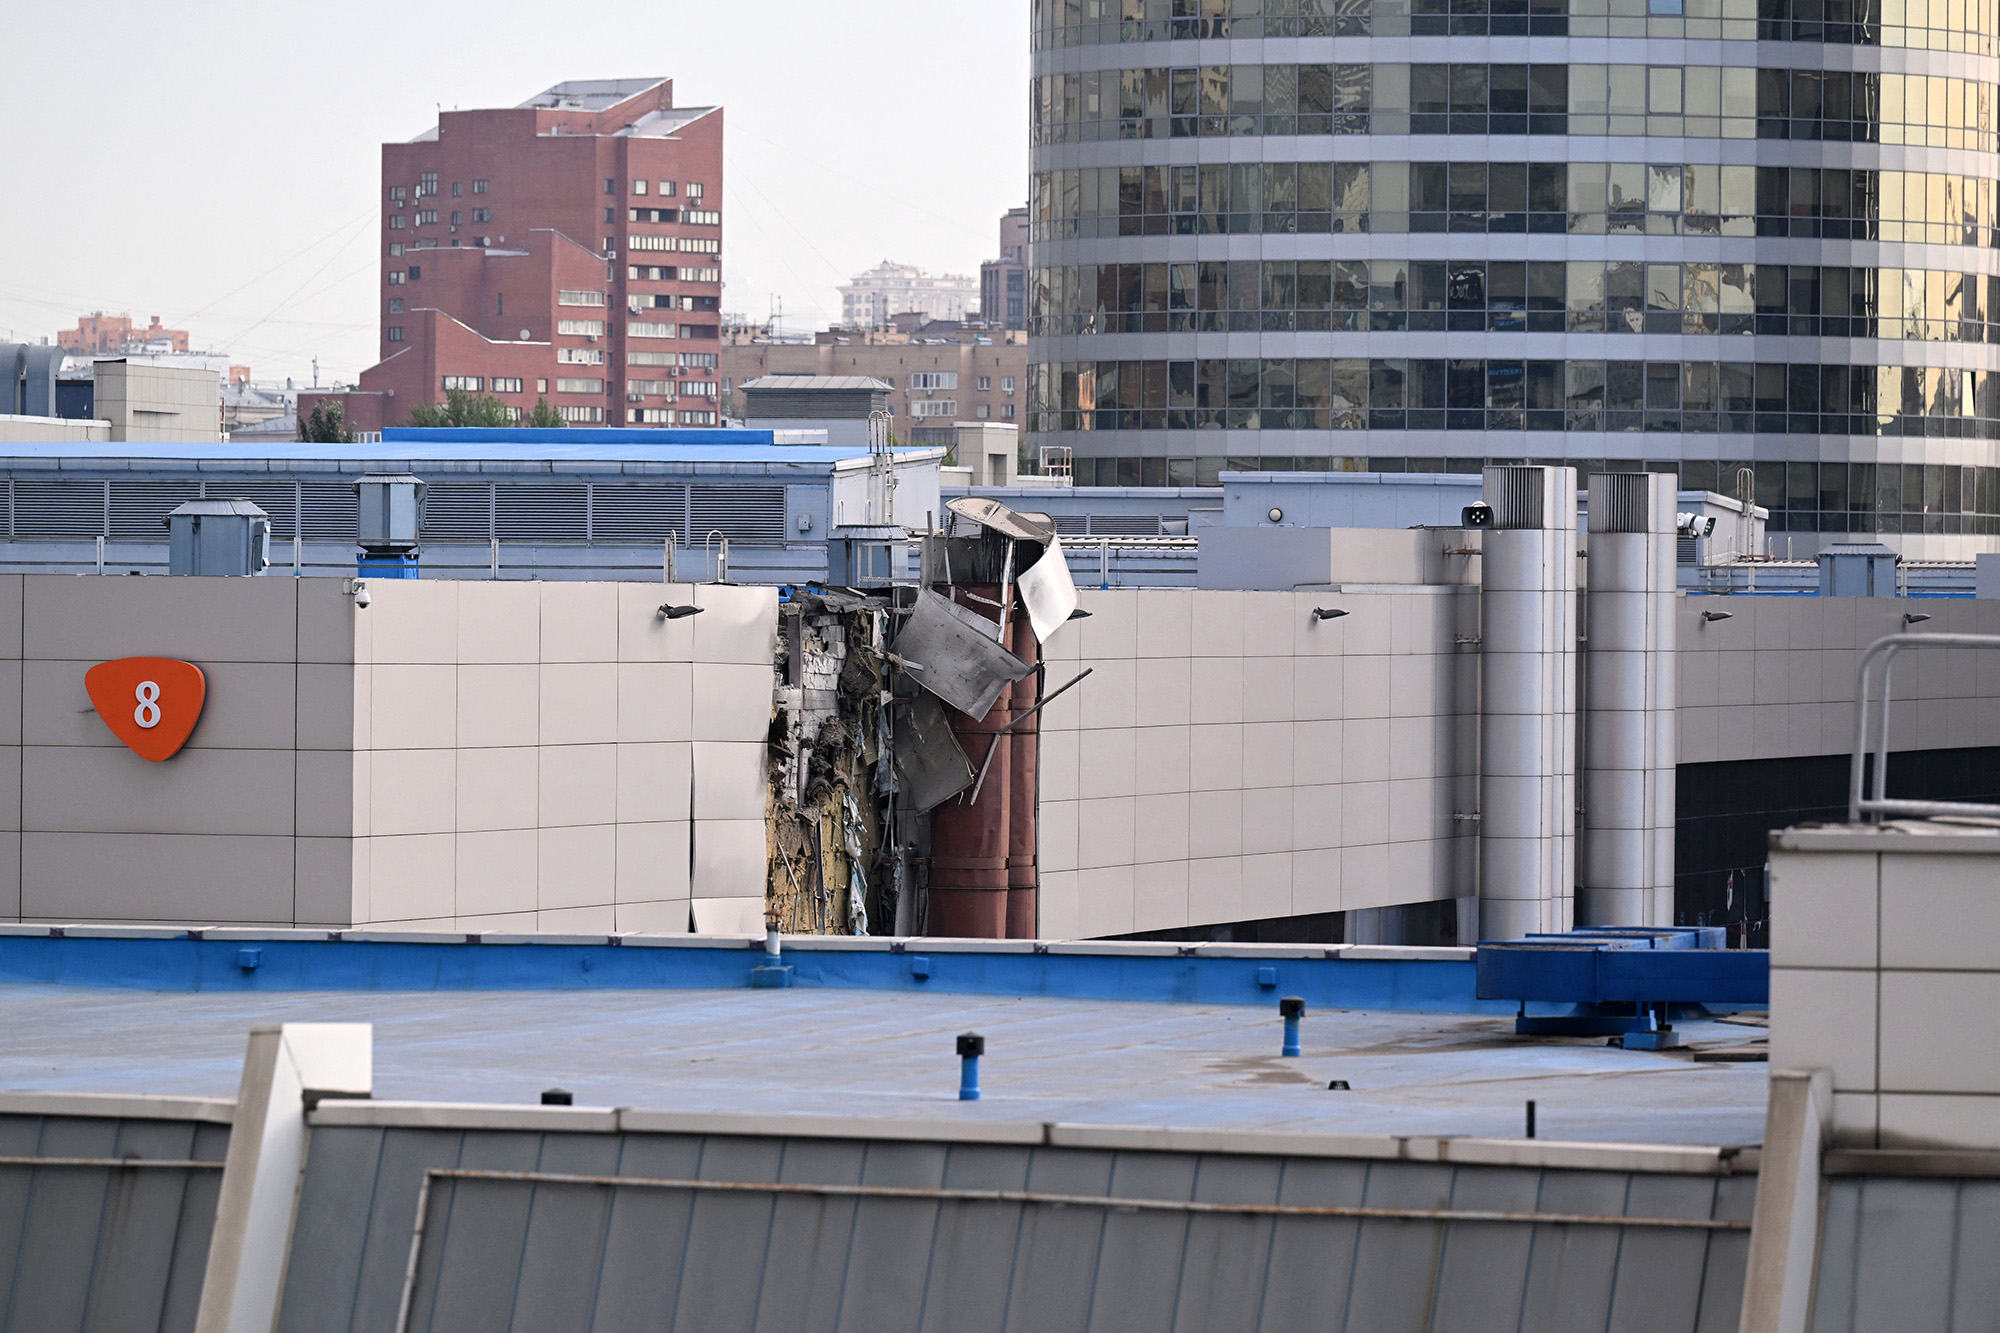 Damage to the Expocentre building in Moscow, Russia, following a drone attack on August 18.